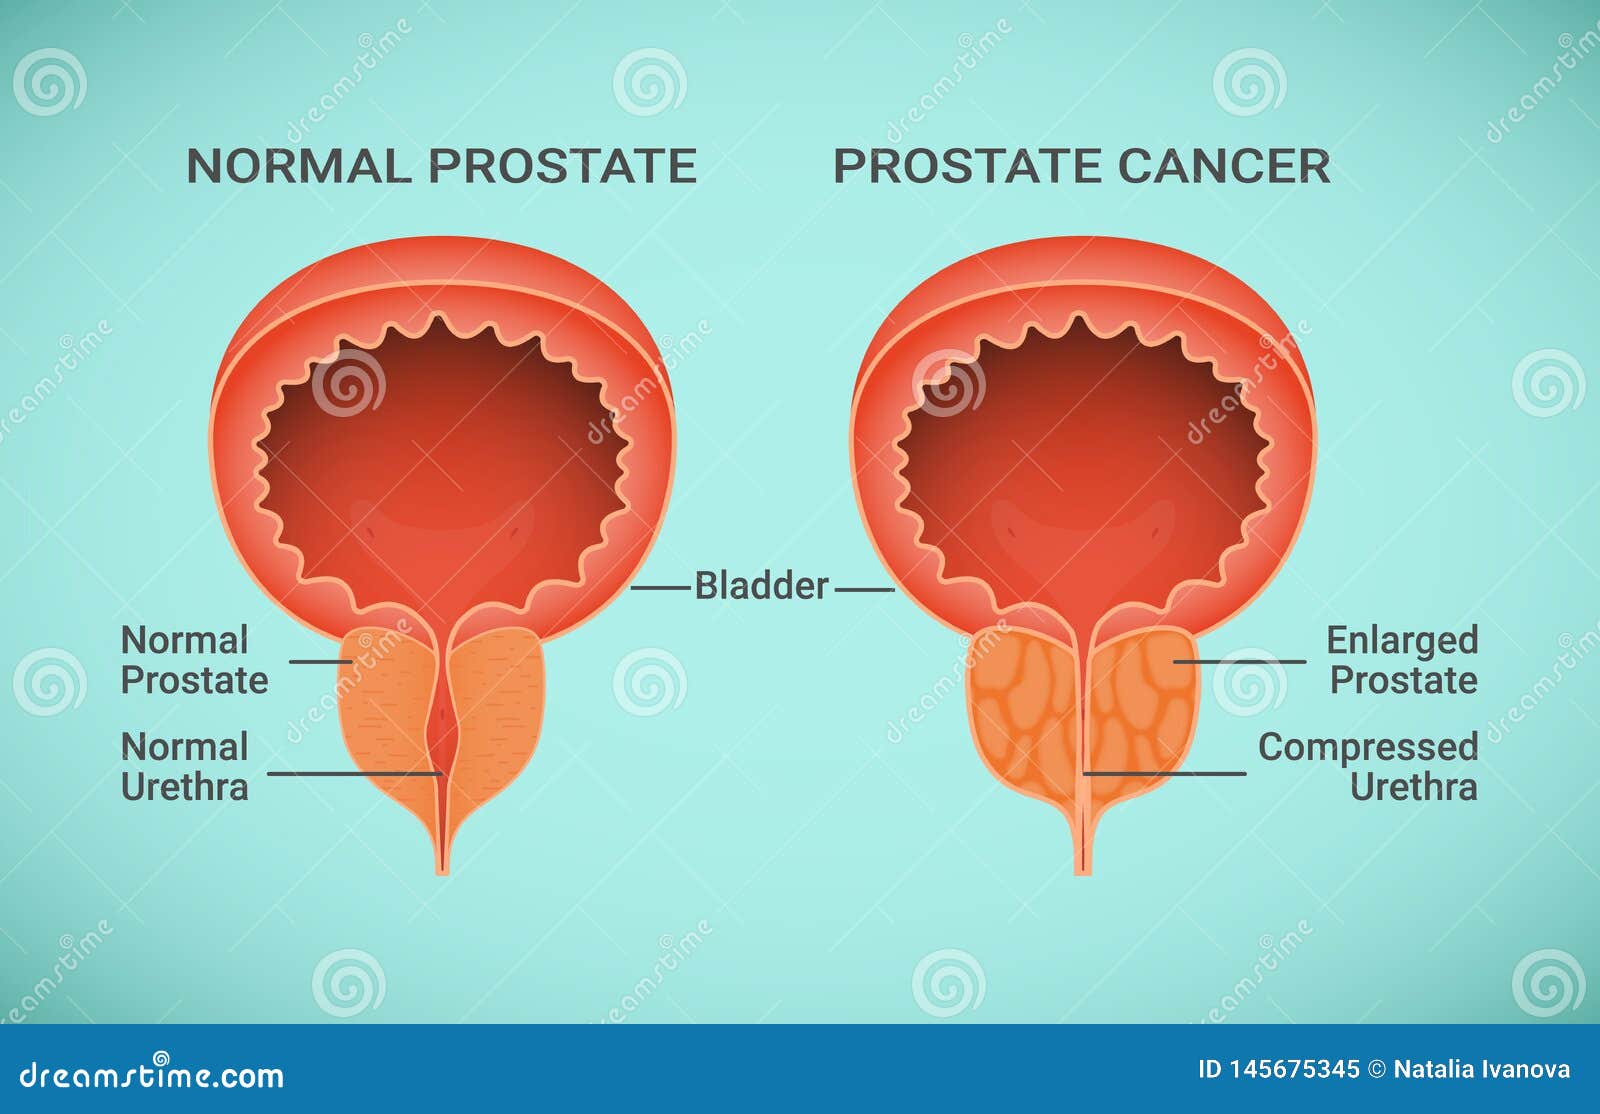 healthy prostate)